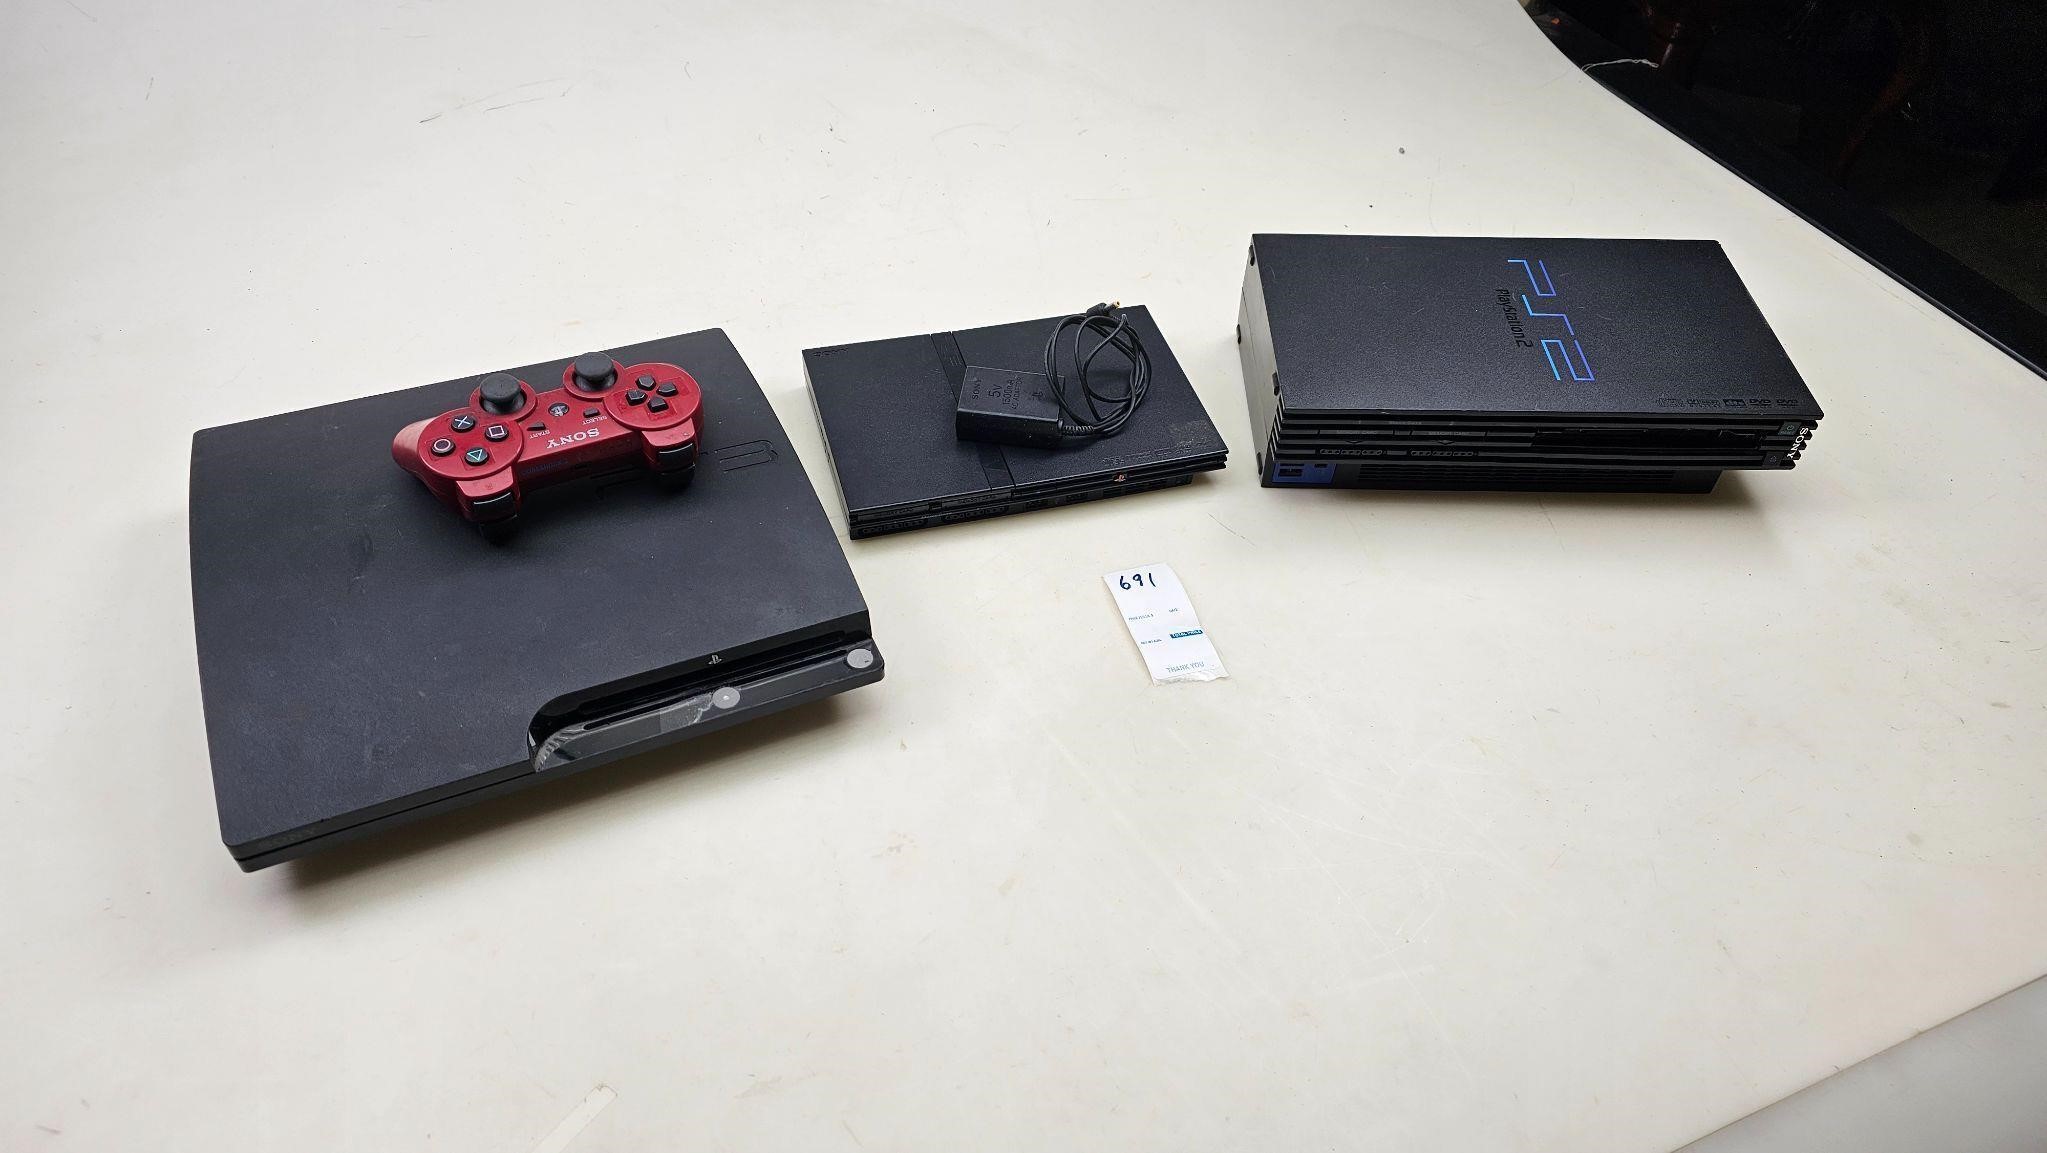 One ps3 & ps3 controller and two PlayStation 2s